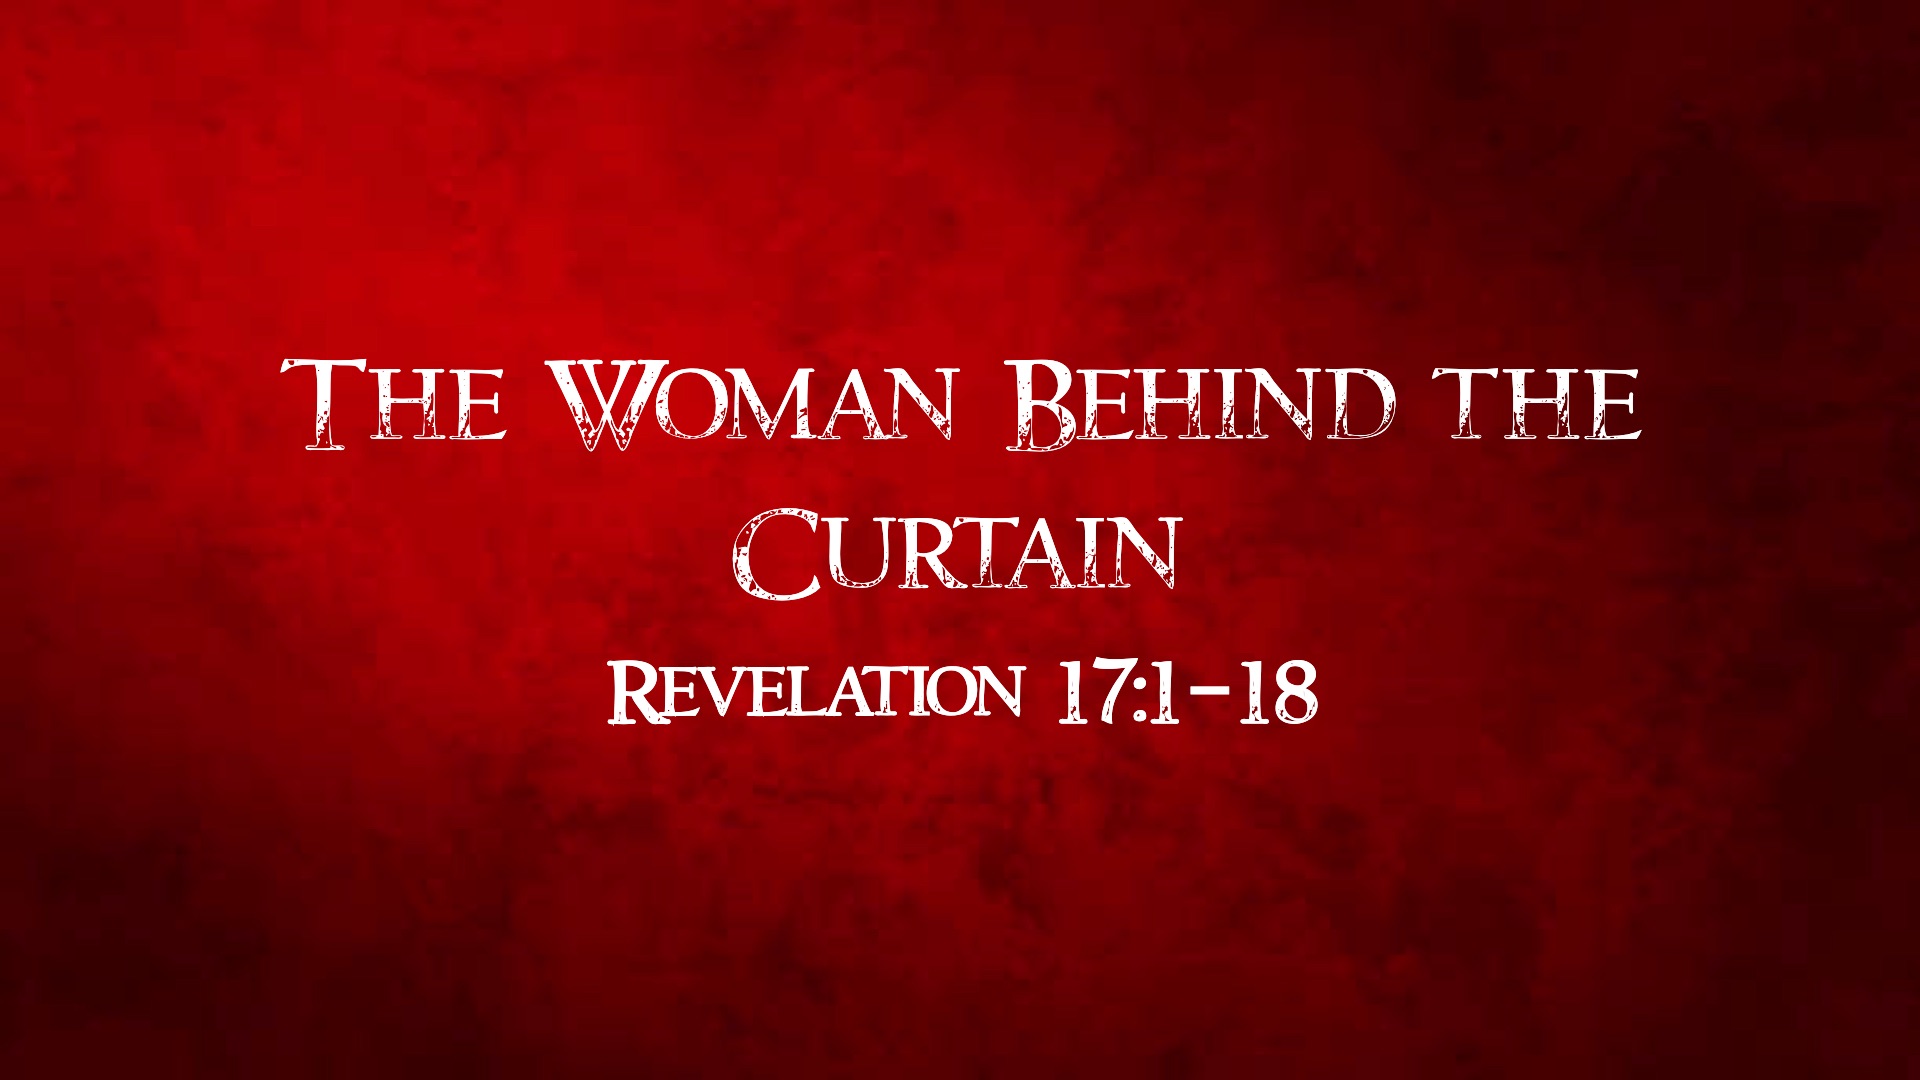 “The Book of Revelation: The Woman Behind the Curtain”